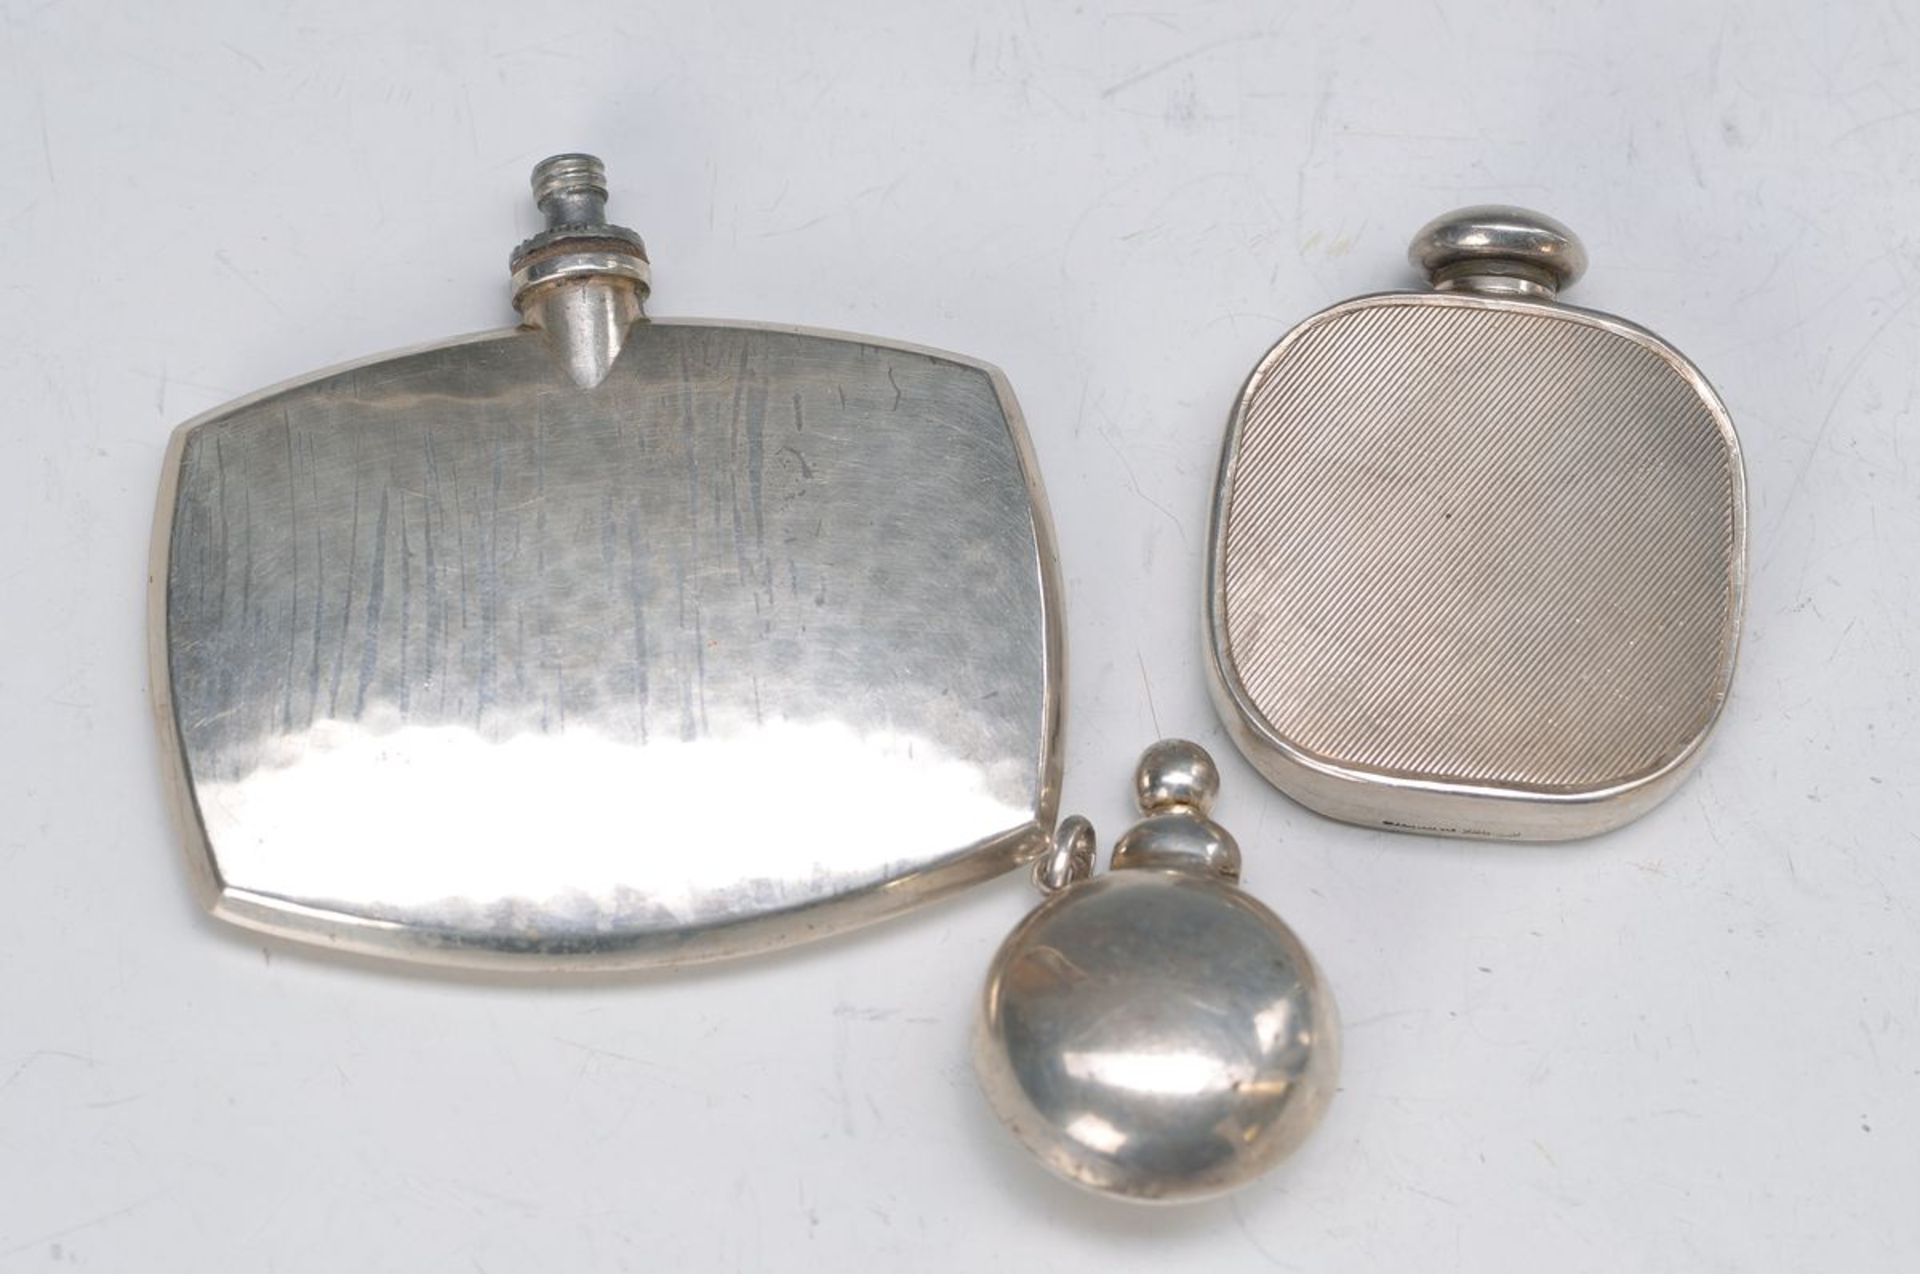 3 snuff bottles, German, around 1920-30, silver, one with hammered decoration, 835 silver, without